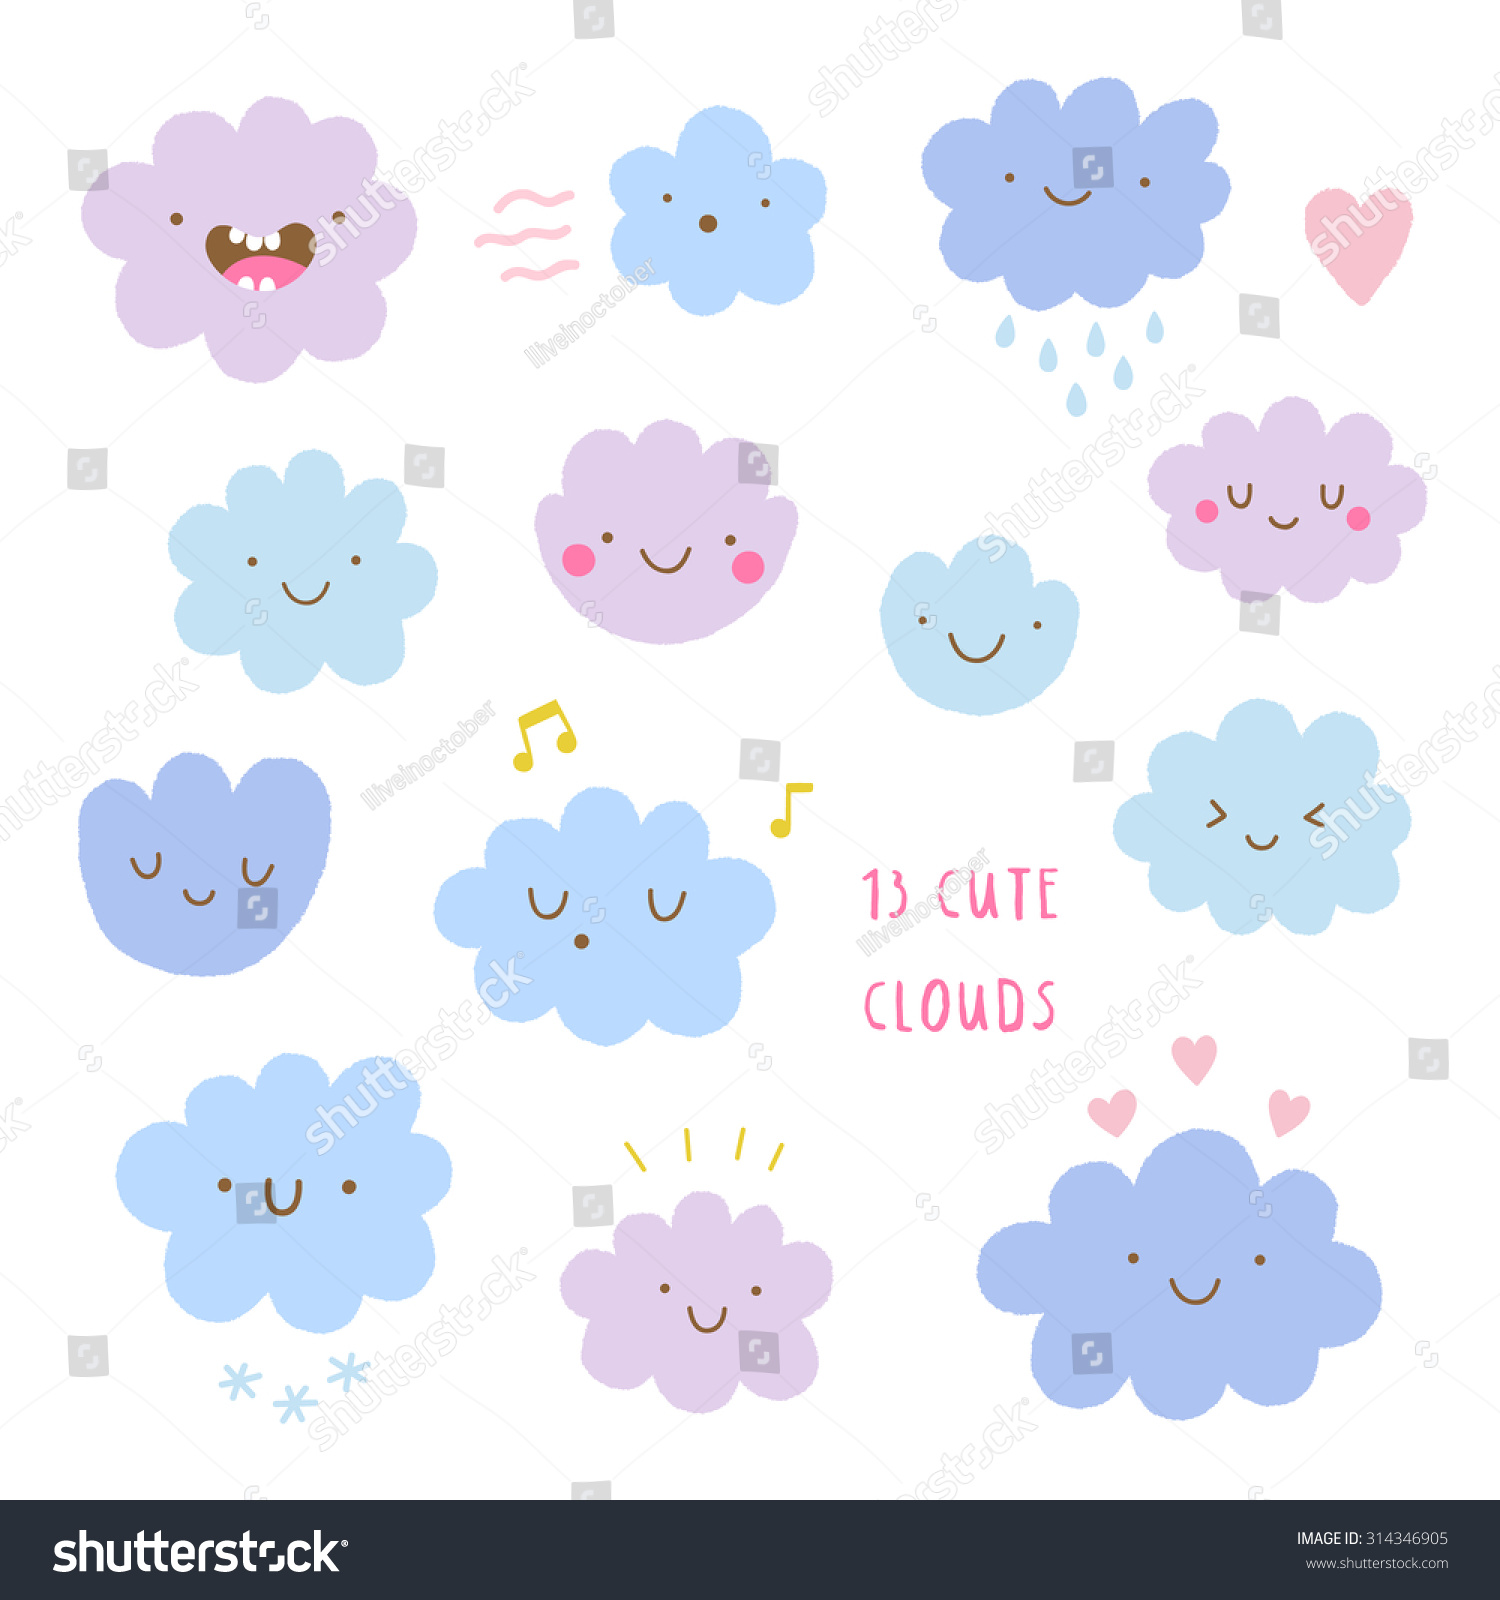 Cute Vector Set Of Clouds Icons. Funny Happy Smiley Clouds. Happy ...